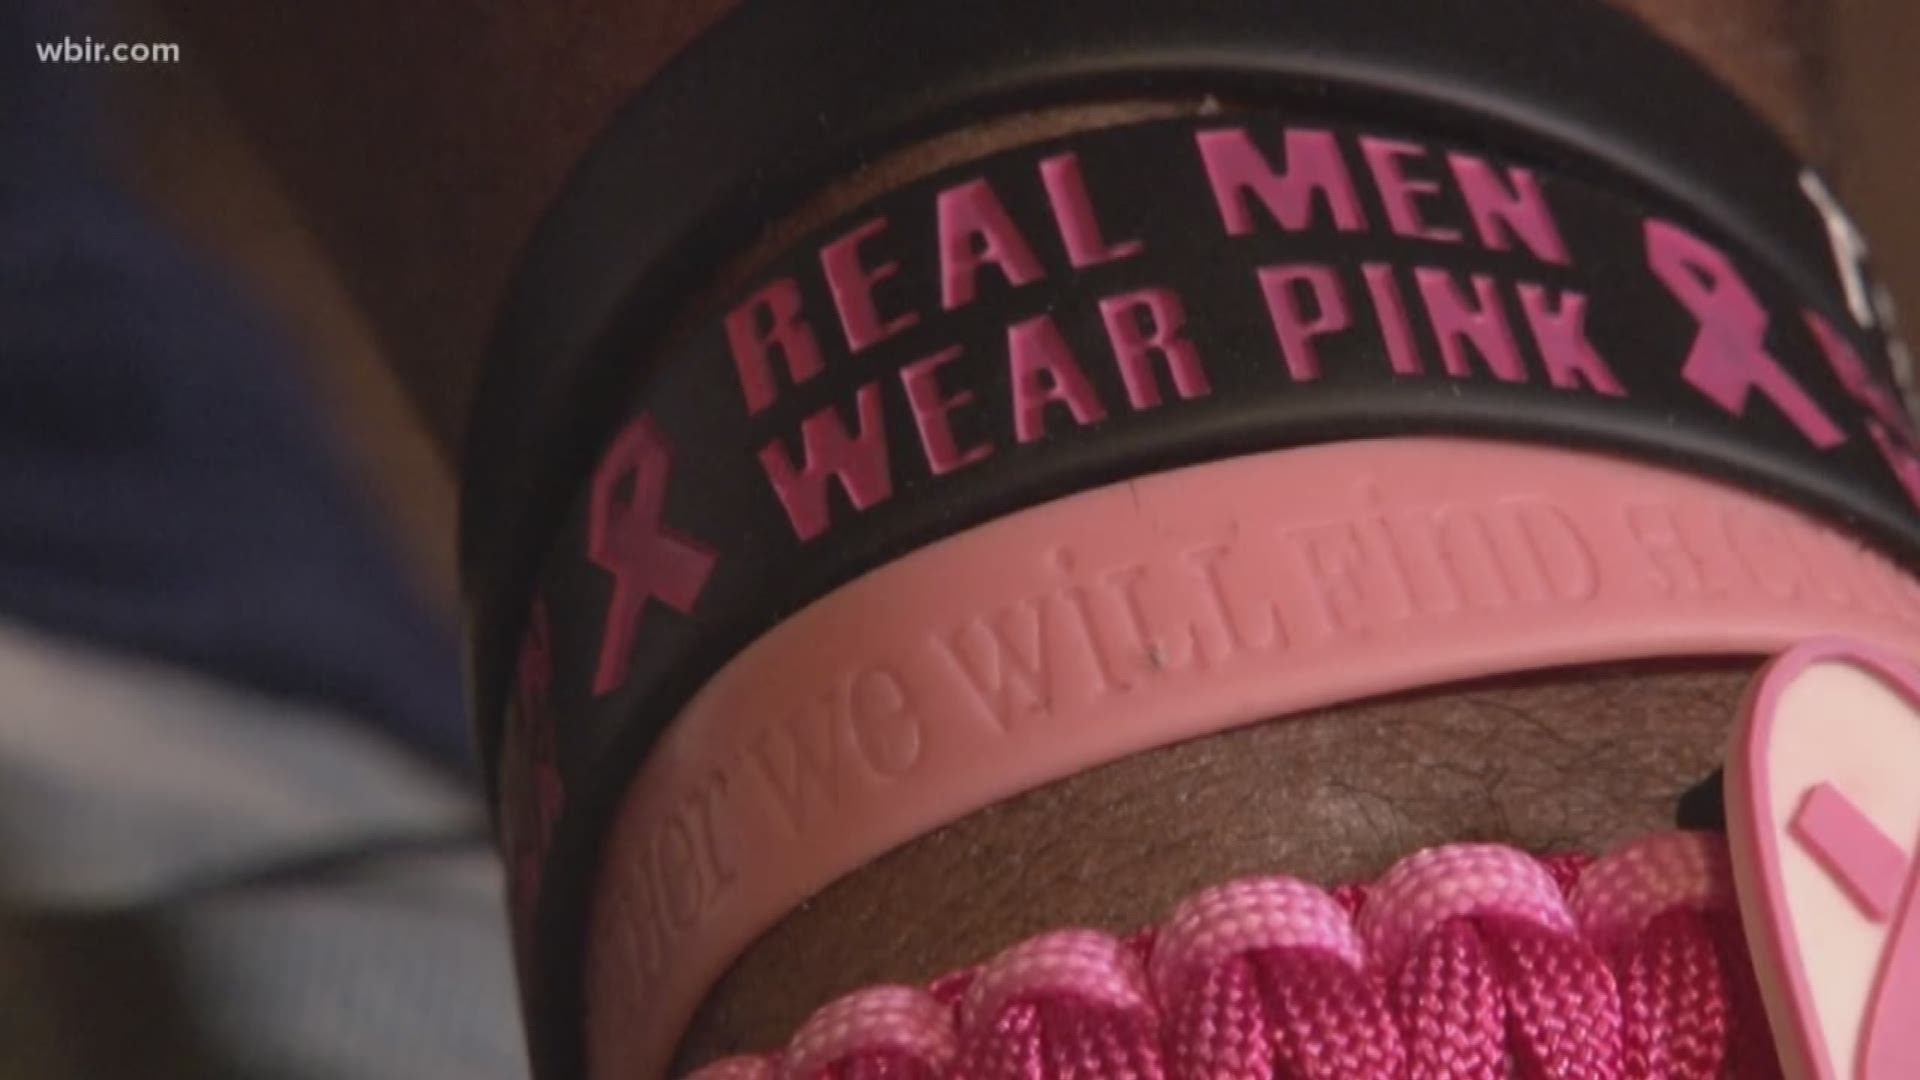 James Mathis was one of relatively few men who are diagnosed with breast cancer. Now, he hopes sharing his story will encourage everyone.